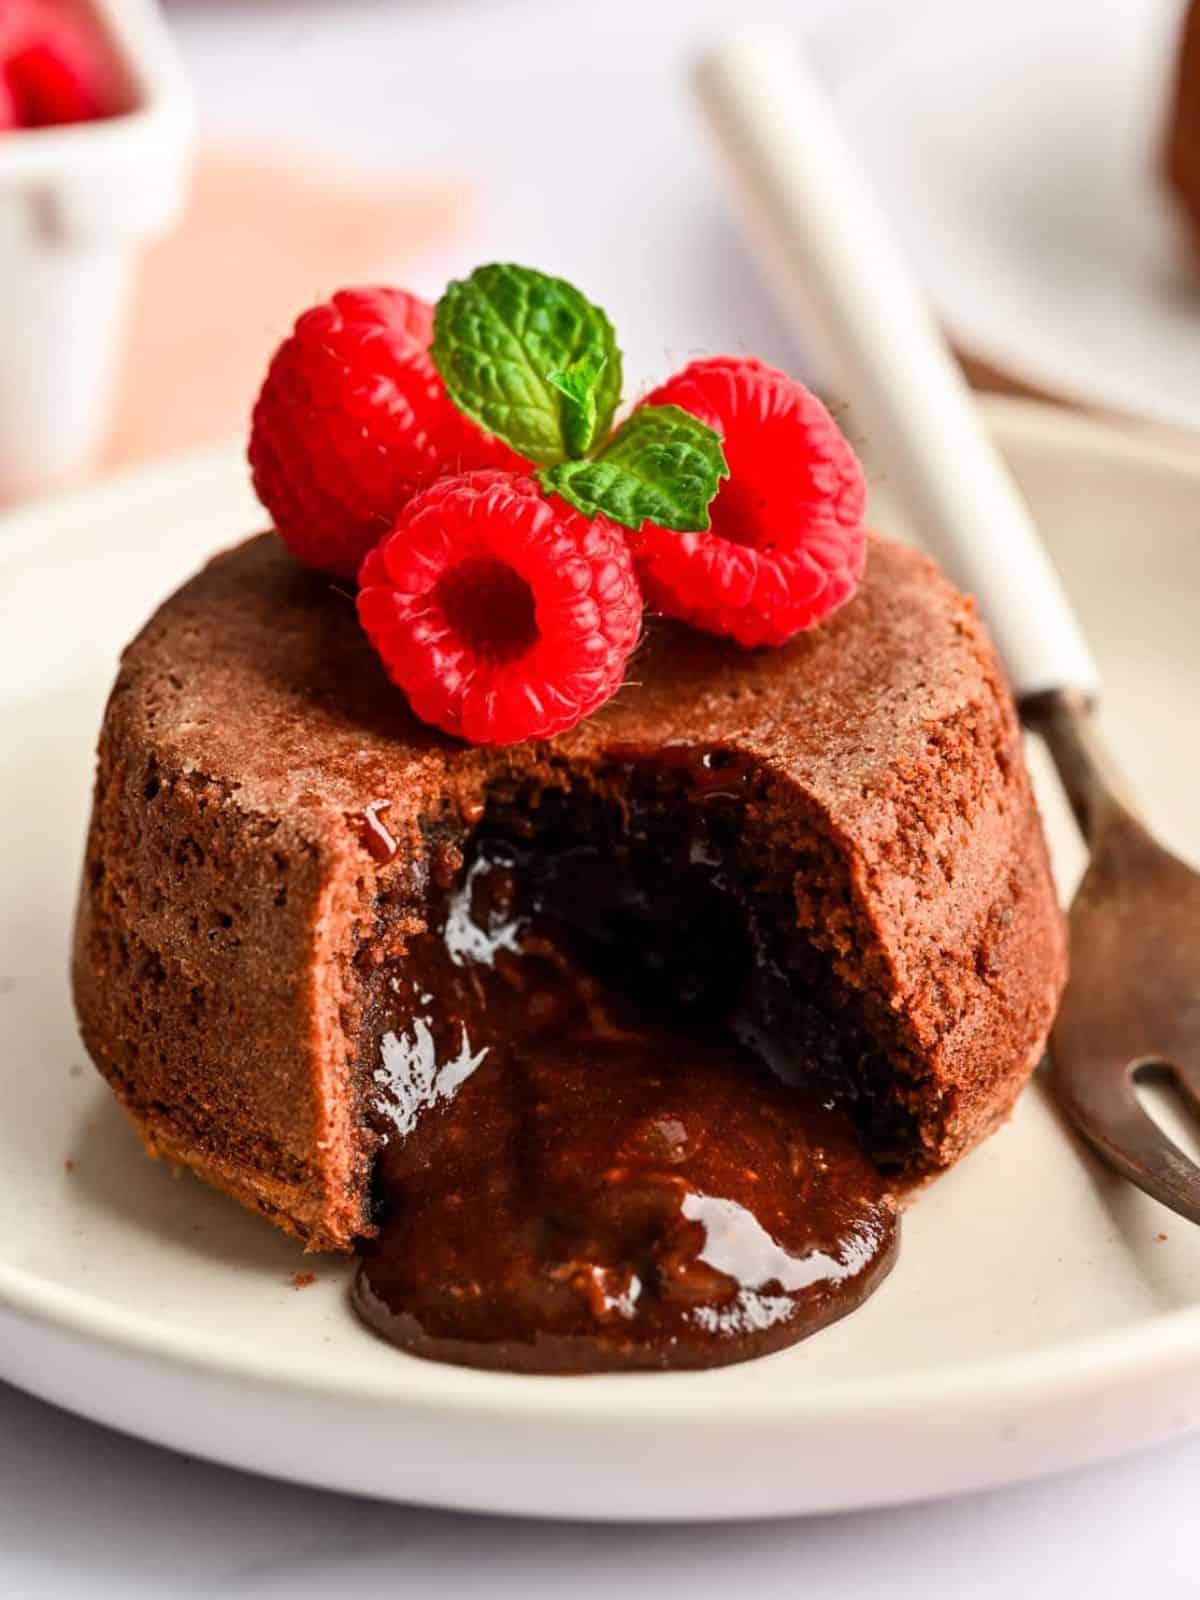 decadent Nutella molten lava cake stuffed with hot and fudgy chocolate spread.